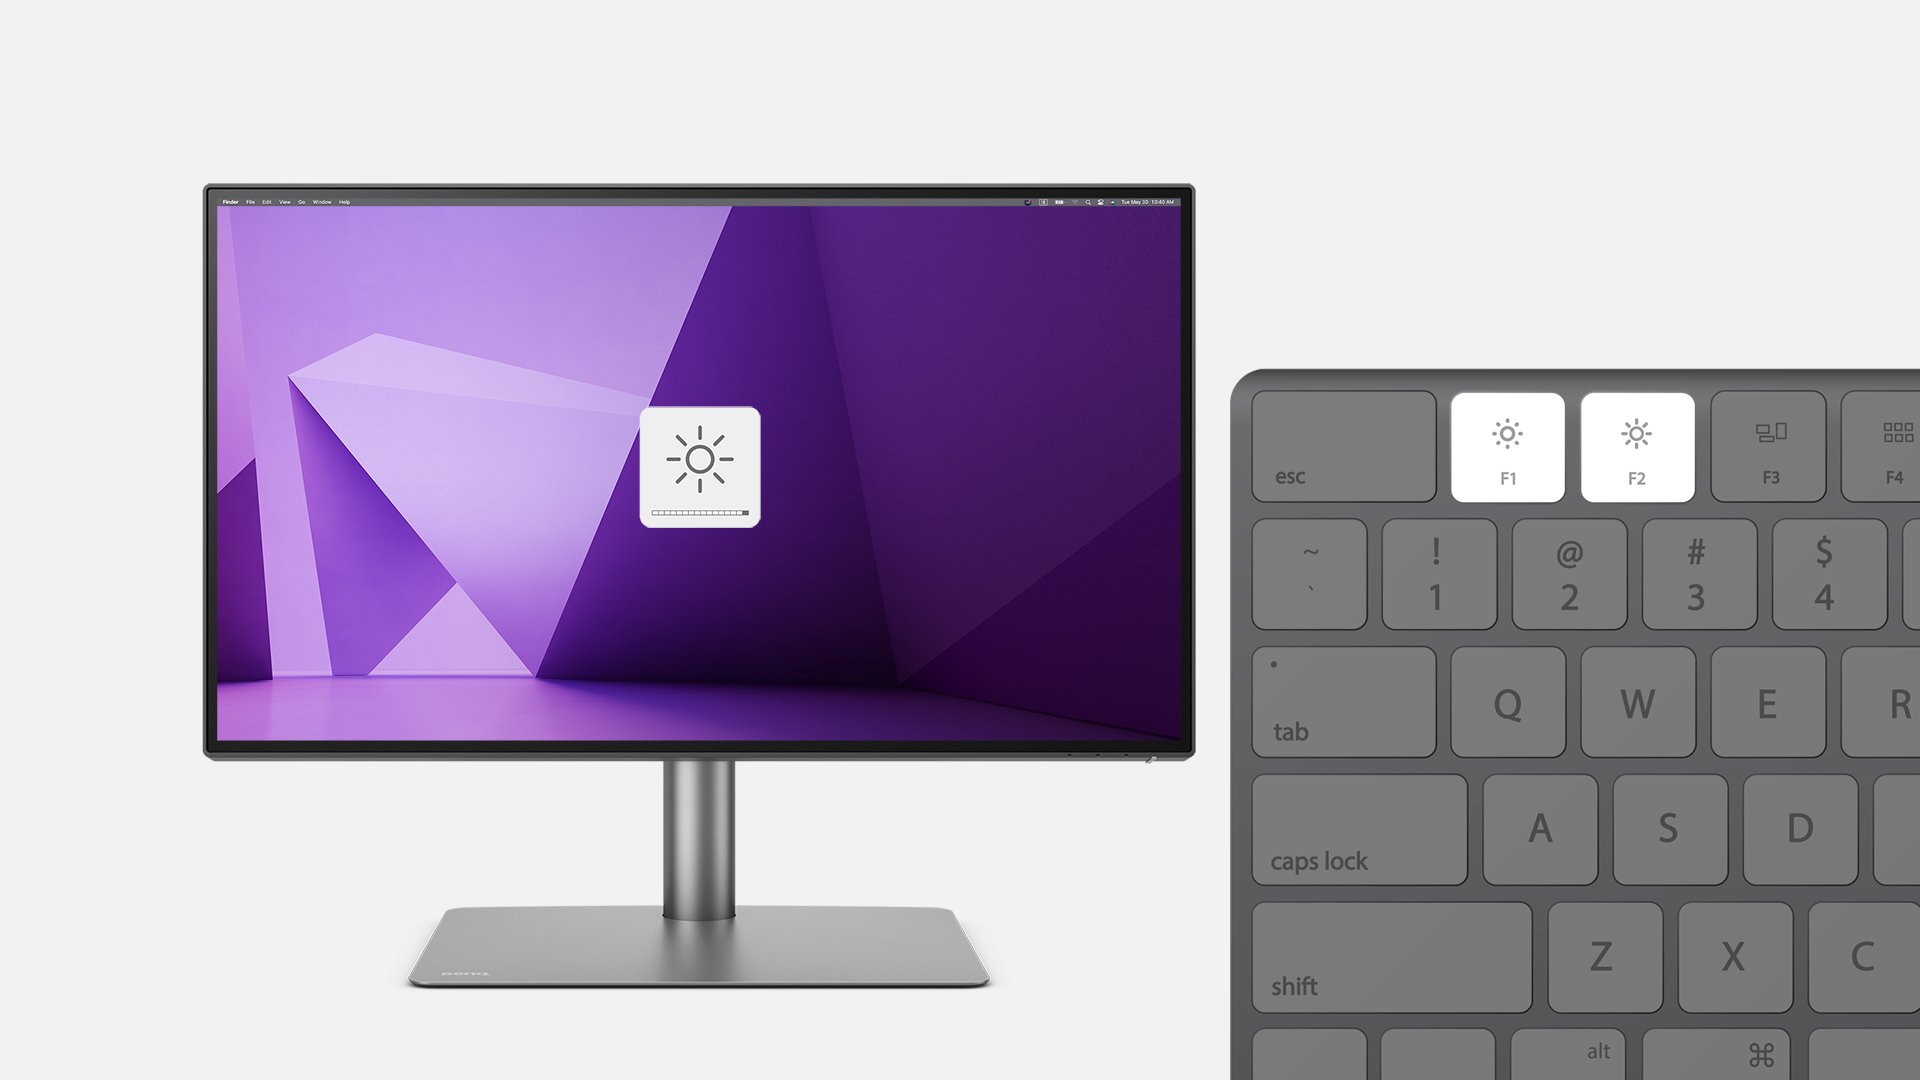 BenQ Display Pilot 2 let you adjust display brightness respectively with your Mac keyboard.